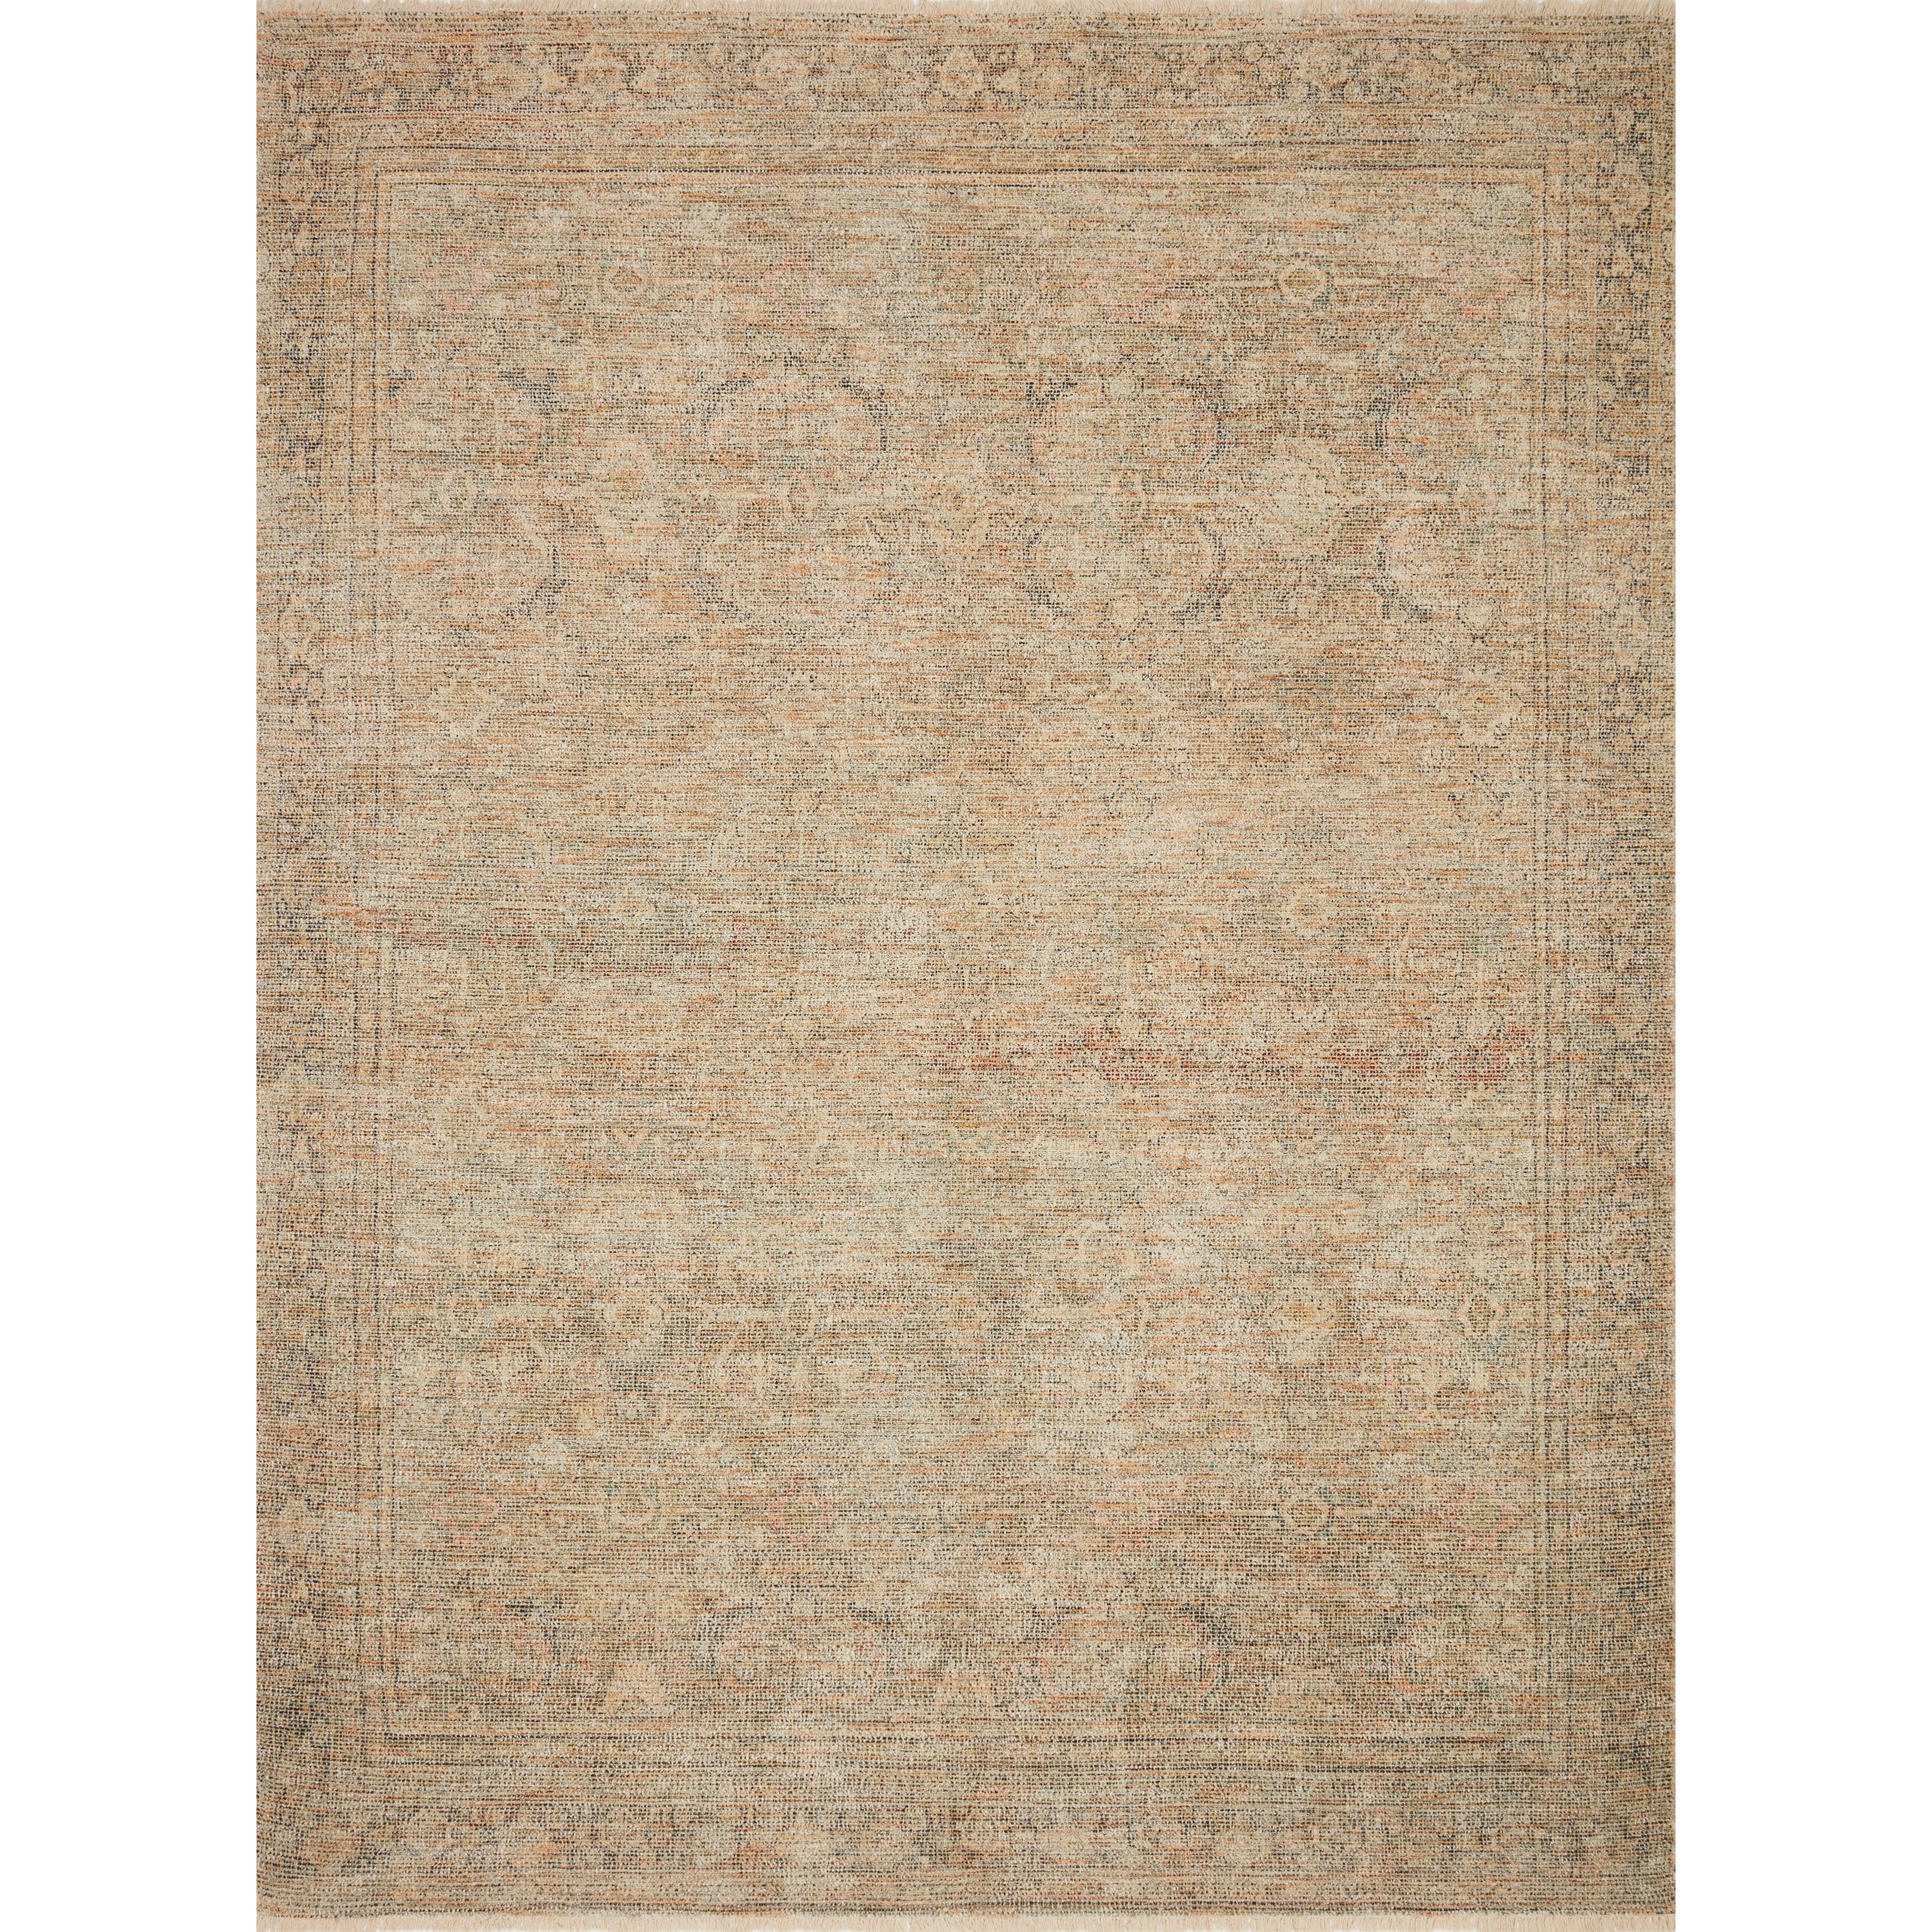 Hand-woven by skilled artisans, the Priya Olive / Graphite Area Rug from Loloi offers beautiful tonal designs accentuated by a carefully curated color palette in tones of brown, gold, ivory, and blue. Delicate yet strong, the Priya is blended with wool, cotton and an instant classic made for today's home.